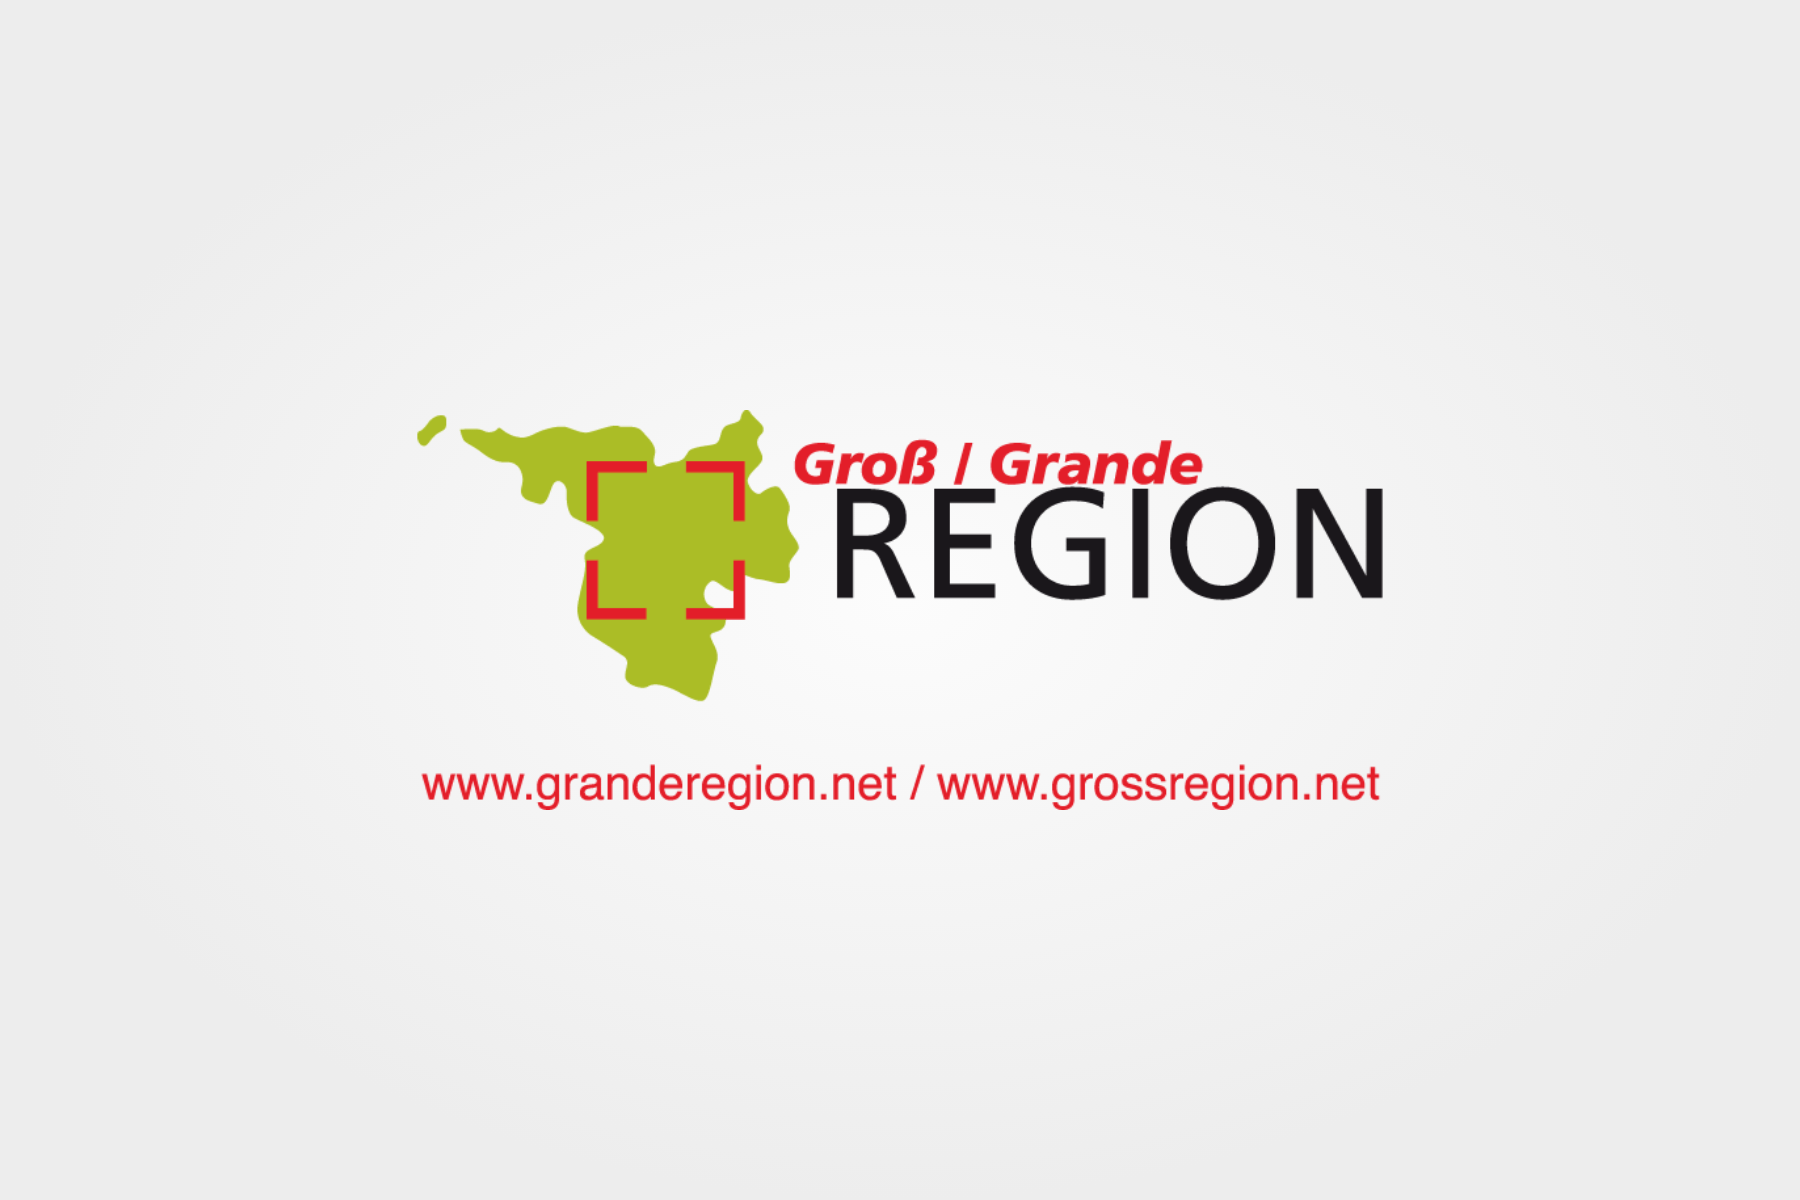 The Greater Region